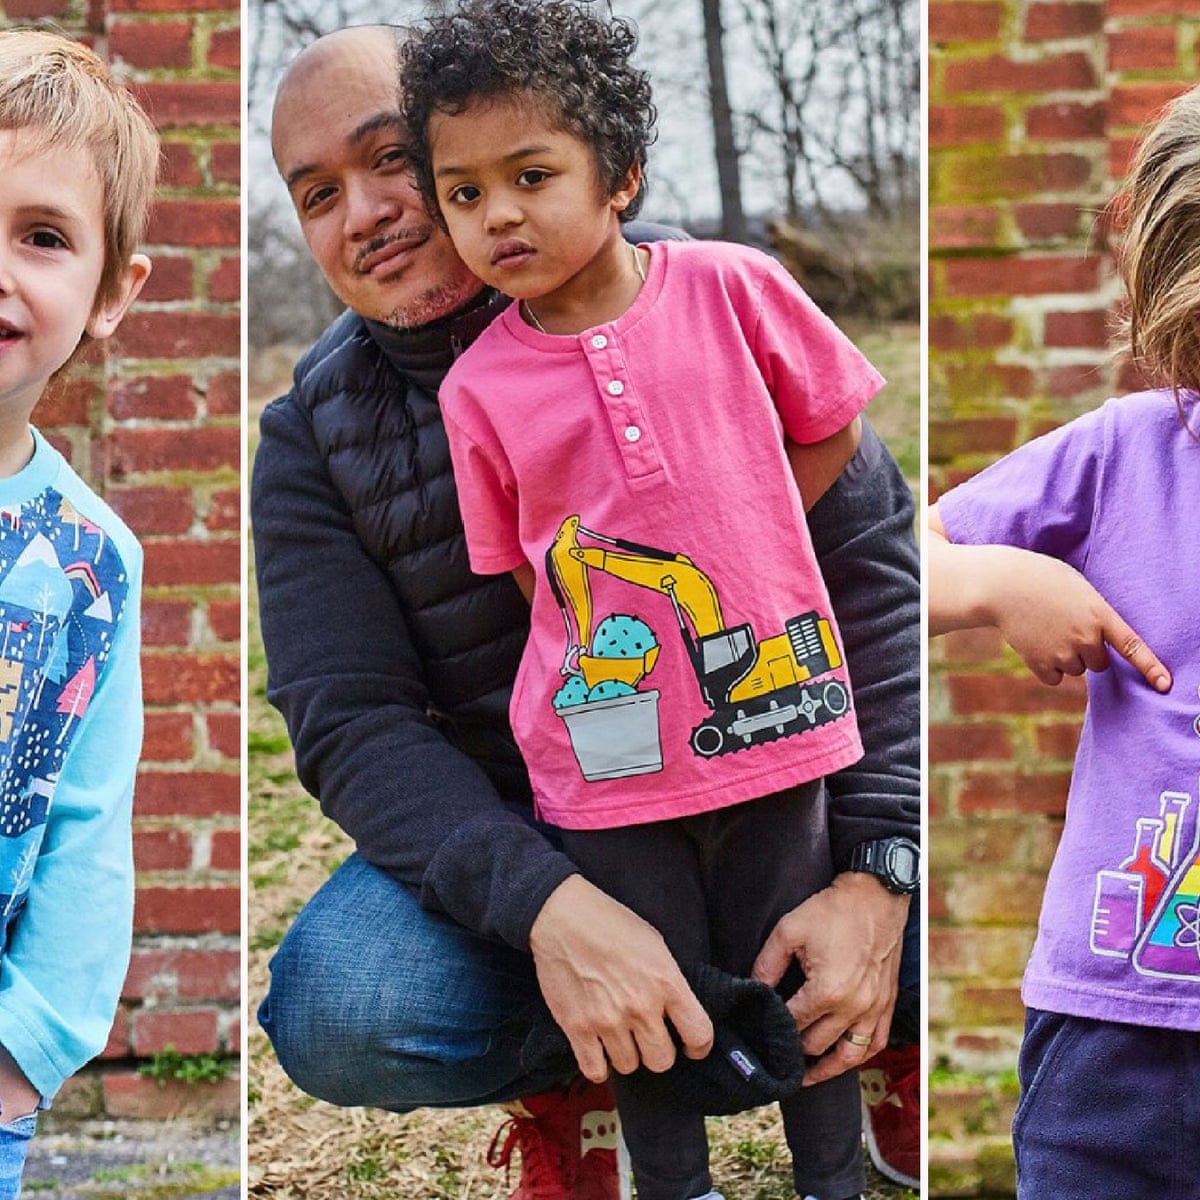 Designers Behind Princess Awesome To Launch Gender-Neutral Clothing For  Boys | Gender | The Guardian